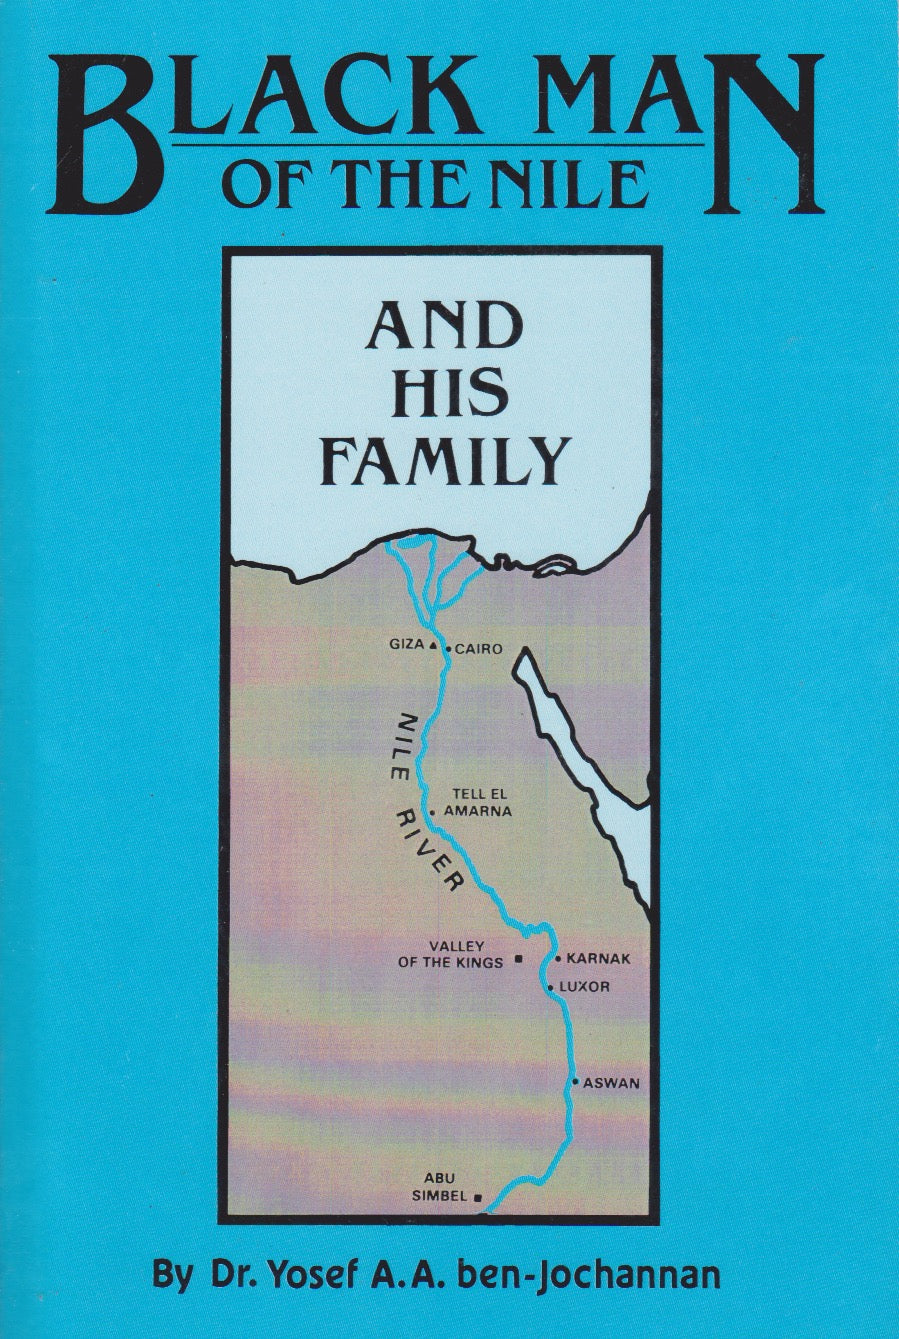 BLACK MAN OF THE NILE AND HIS FAMILY By Dr. Yosef A.A. Ben-Jochannan